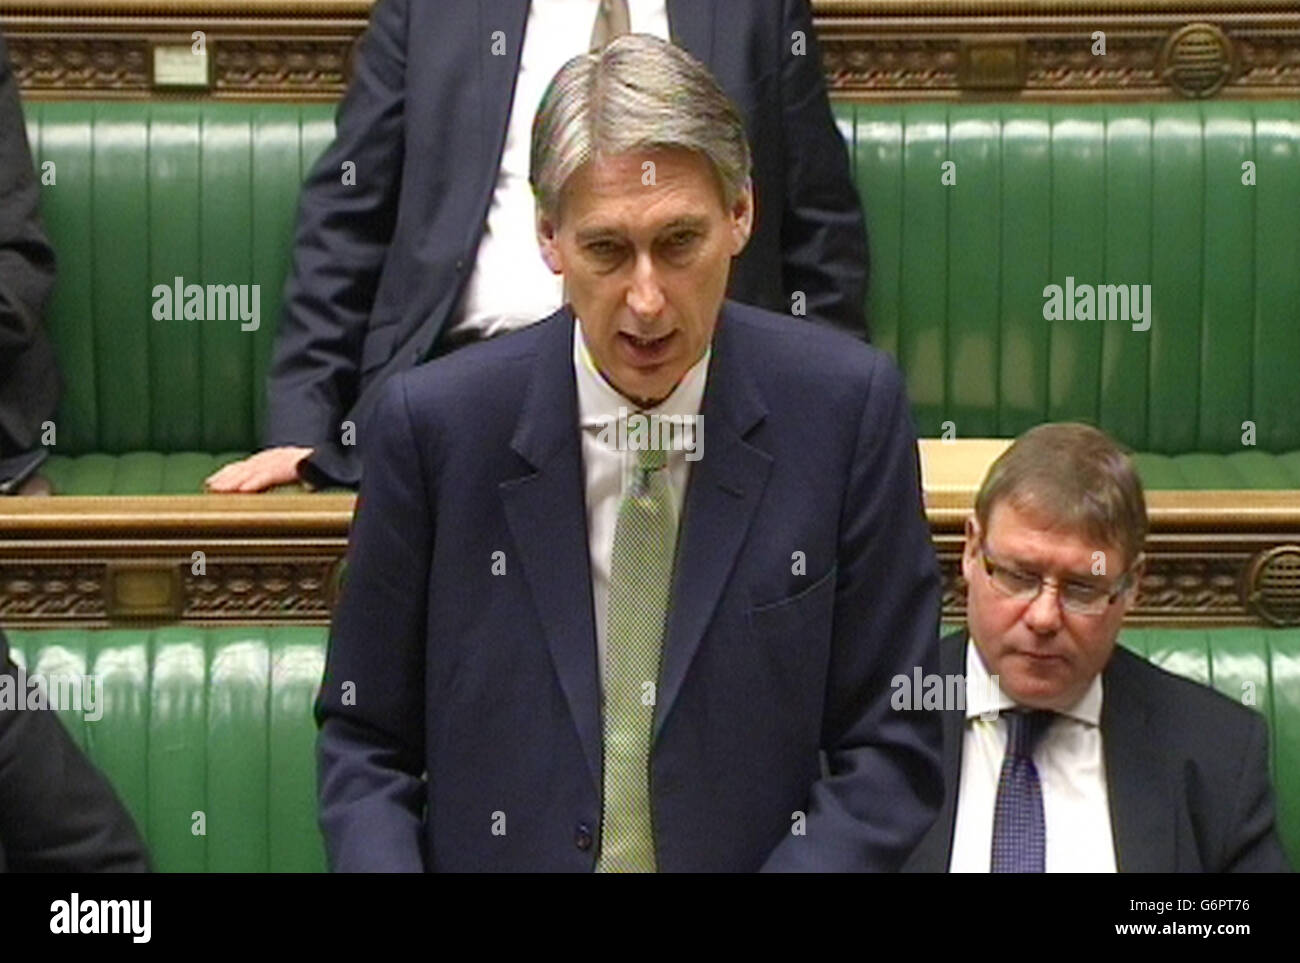 Defence Secretary Philip Hammond issues a statement in the House of Commons, London, regarding the restructuring of the armed forces. Stock Photo